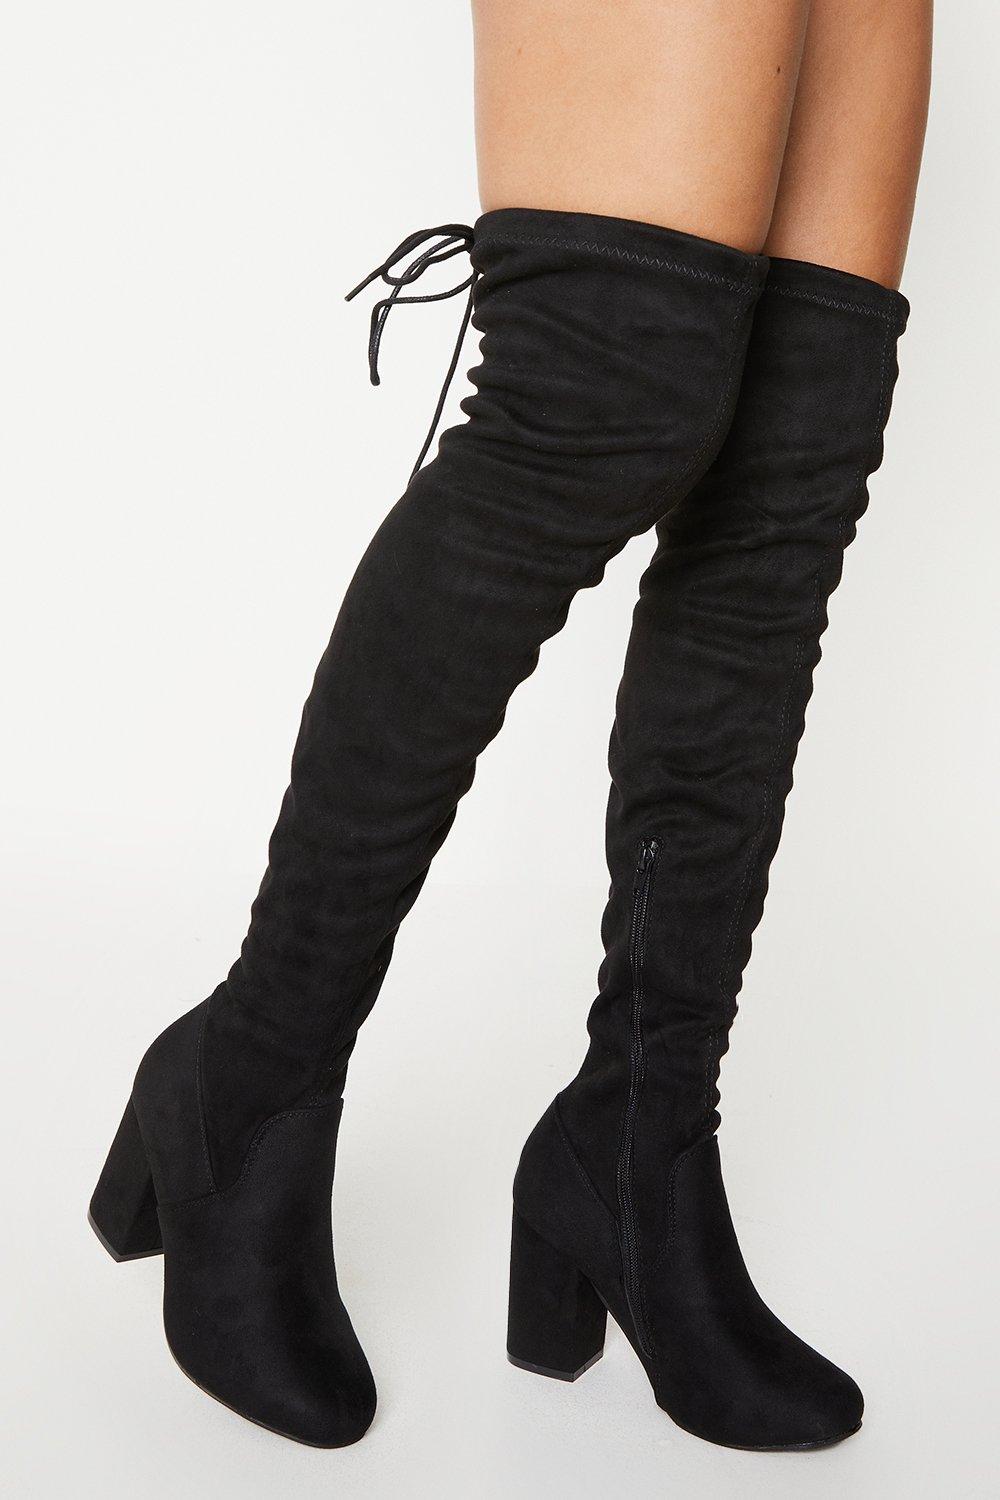 Women’s Wide Fit Krissy Over The Knee Boots - natural black - 8